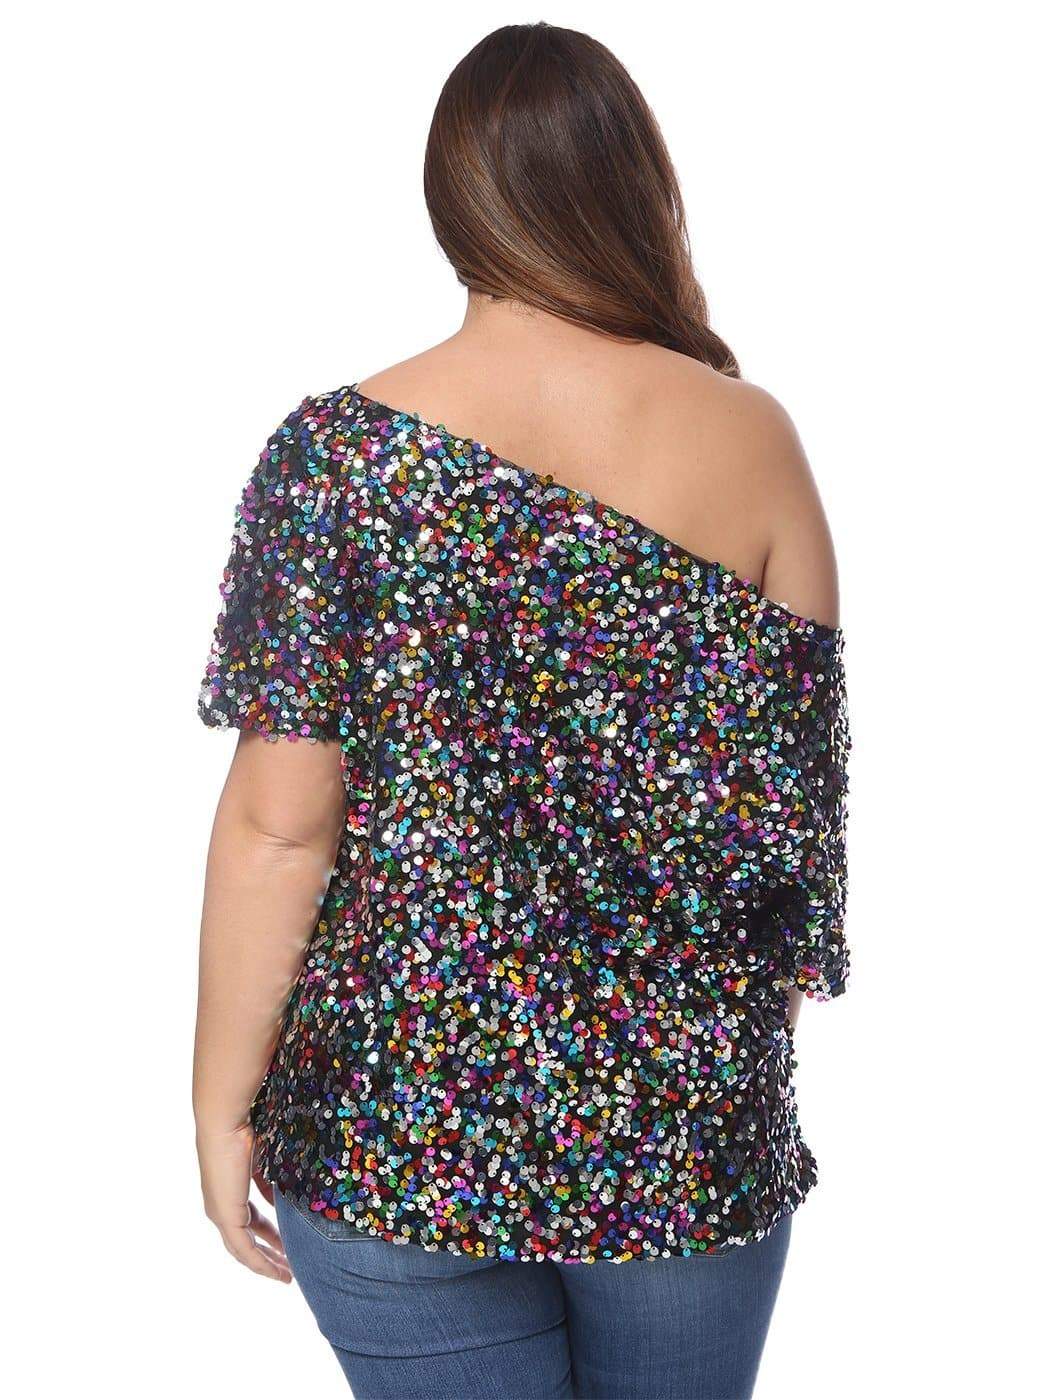 Anna-Kaci Plus Size One Shoulder Sequin Top for Women by Anna-Kaci | Alilang 